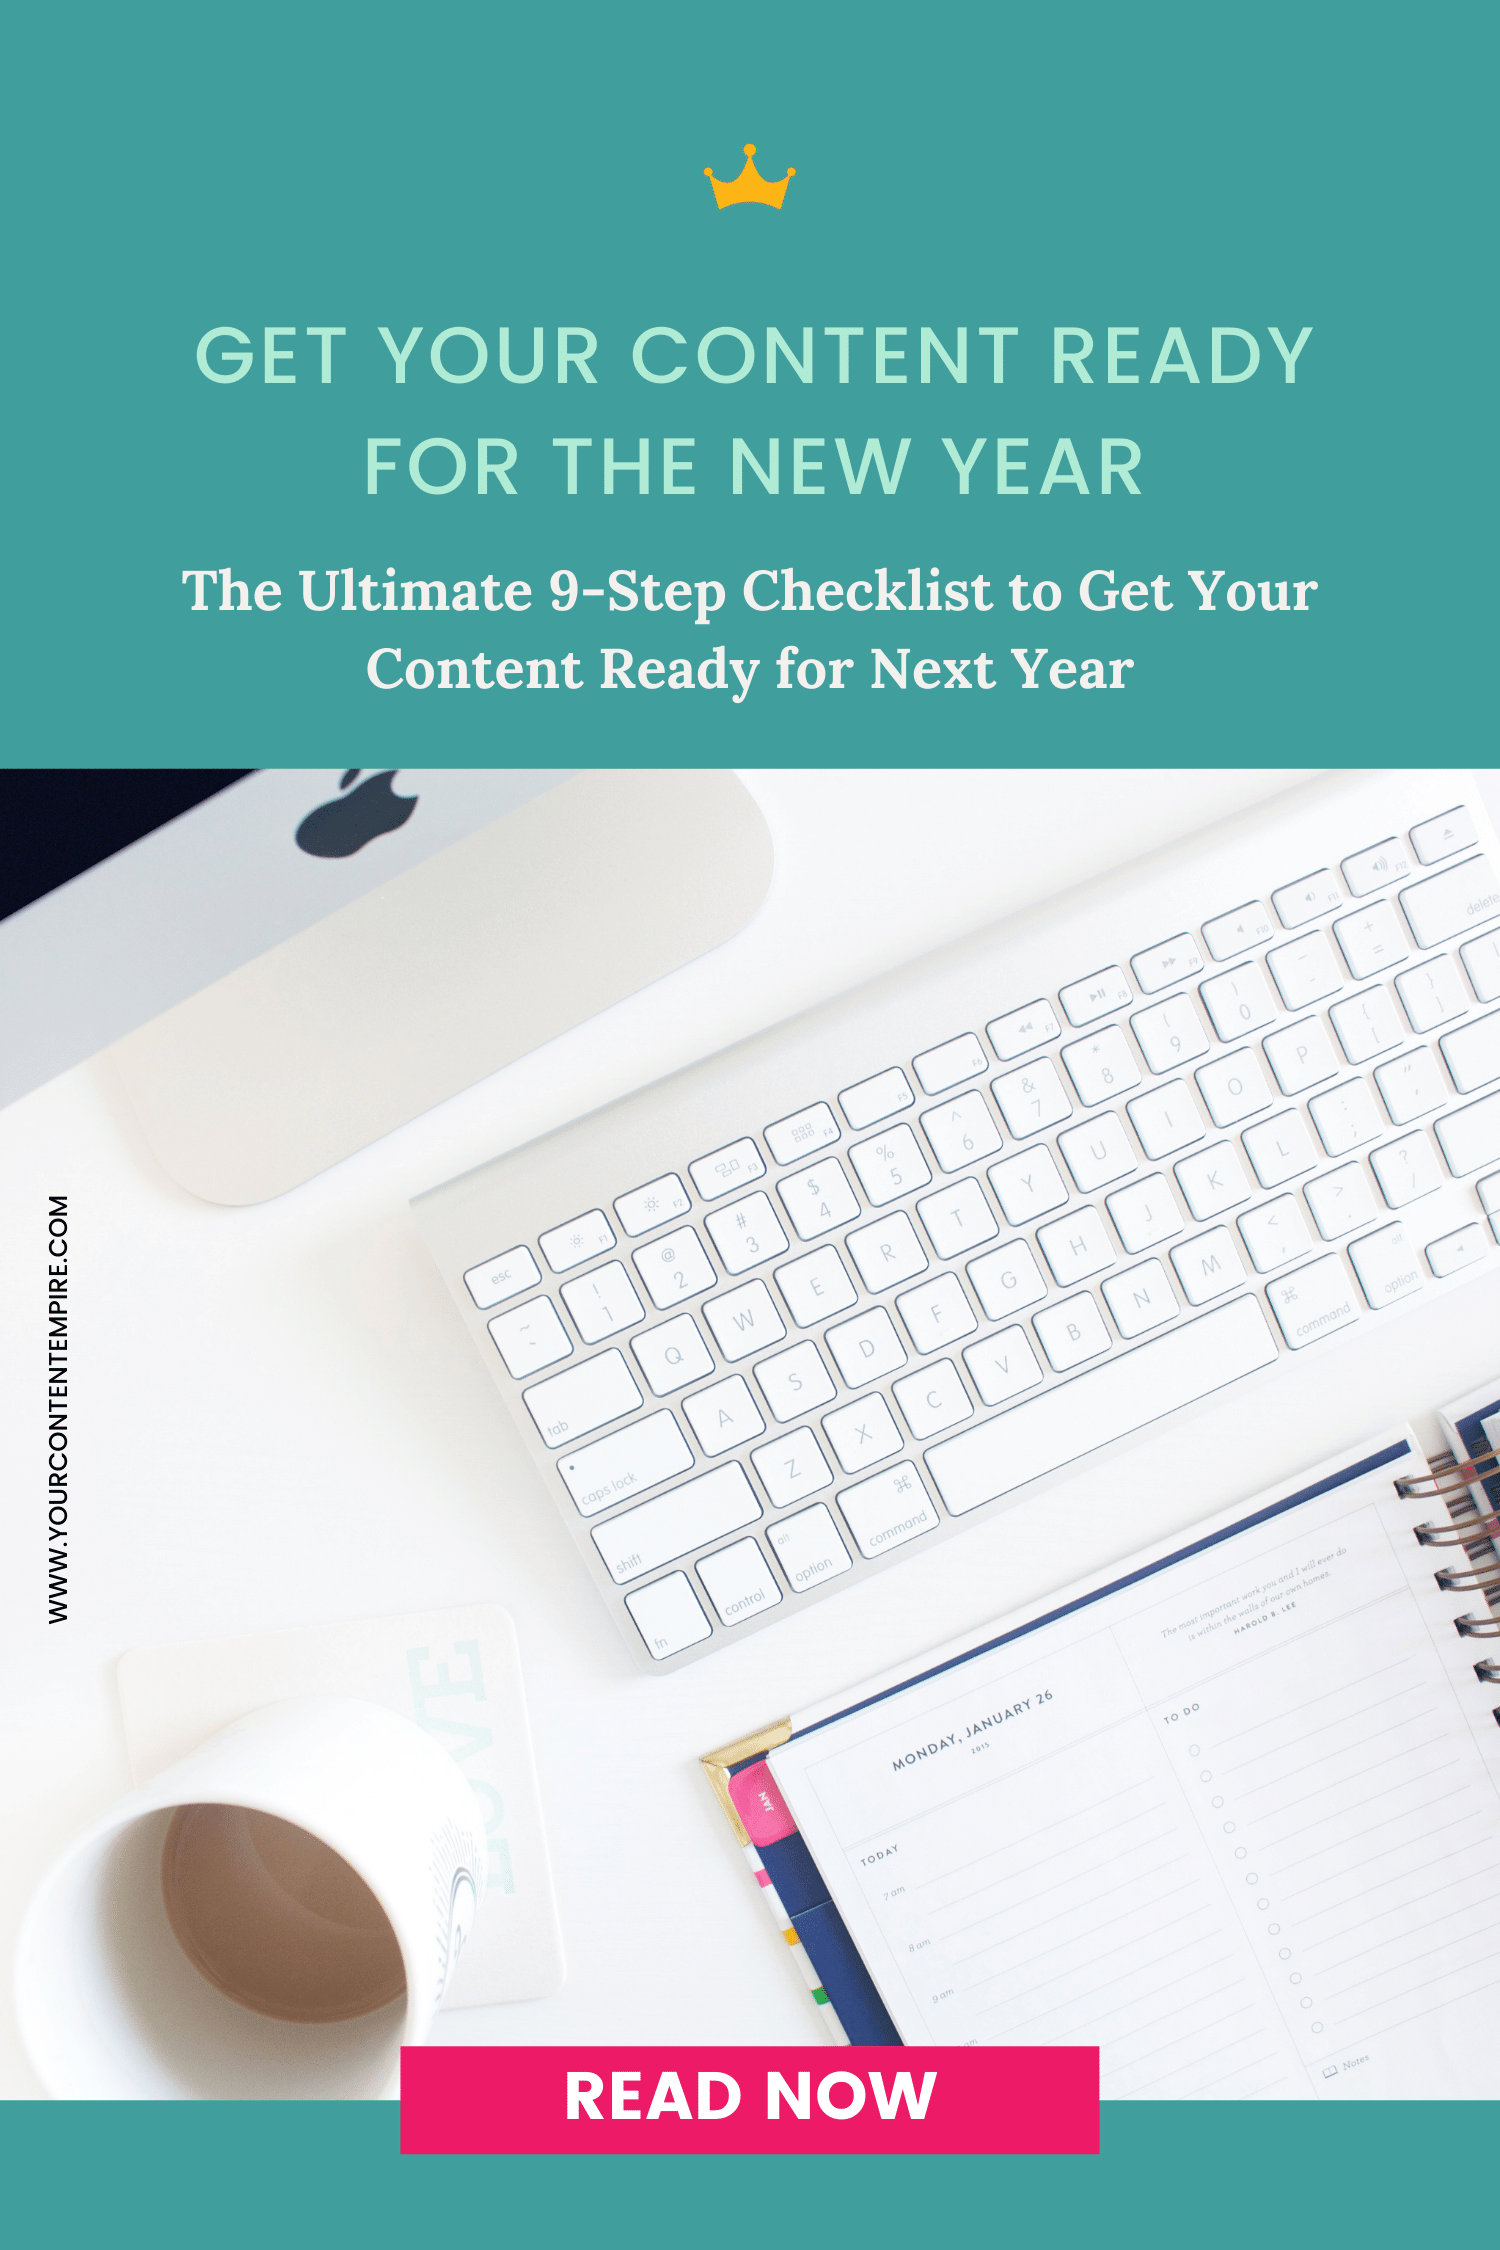 Get Your Content Ready for the New Year